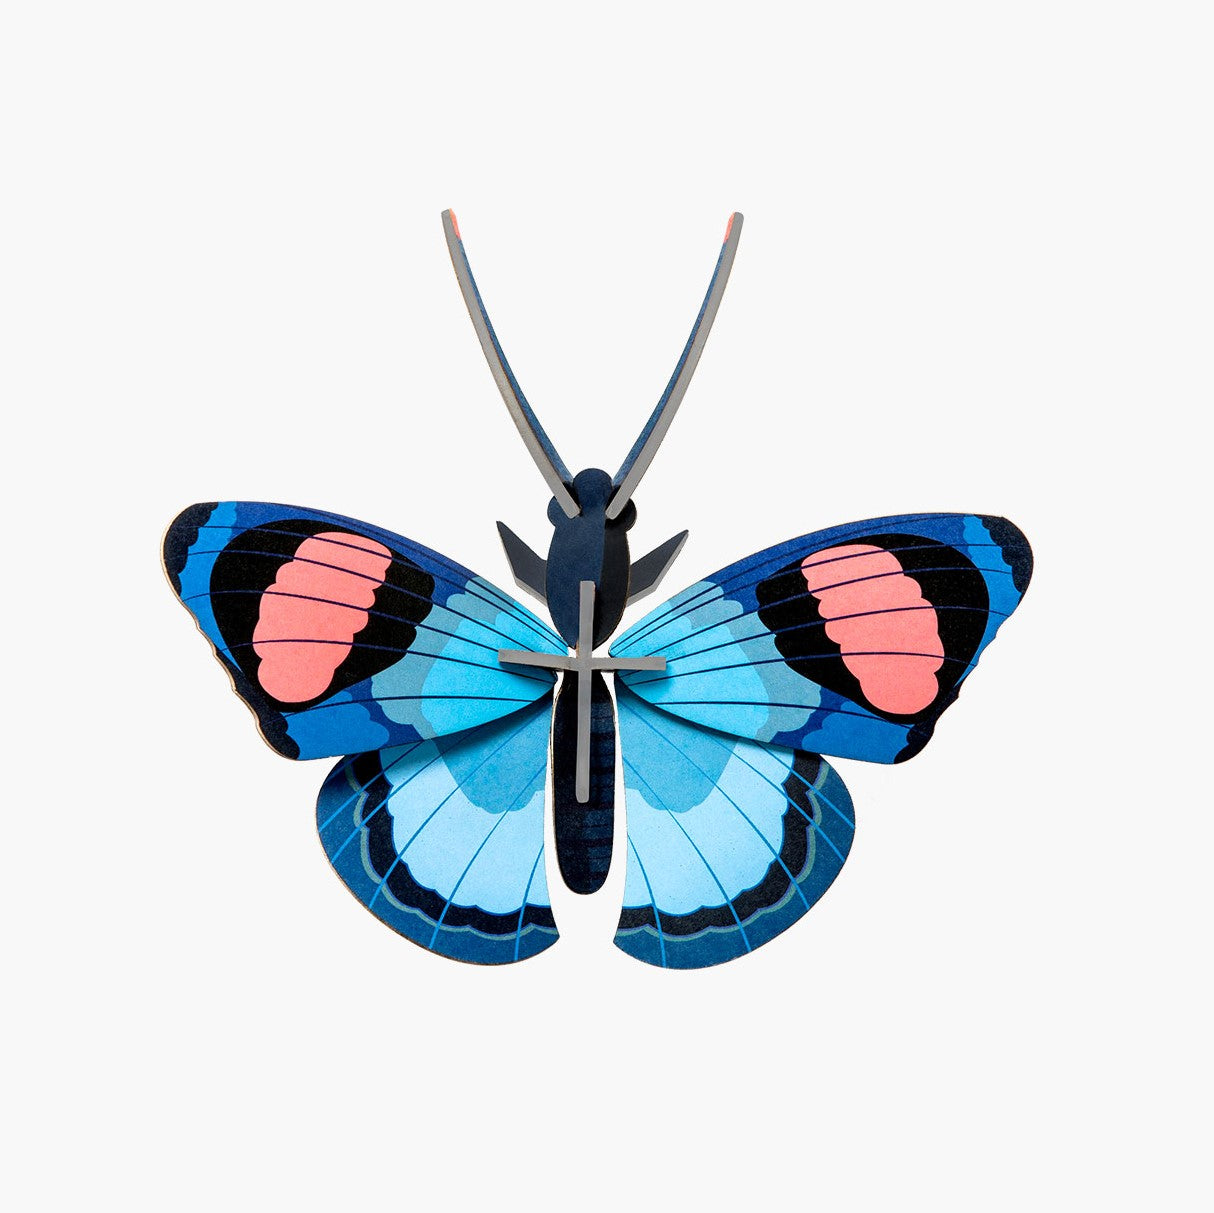 Studio Roof Peacock Butterfly Wall Decor